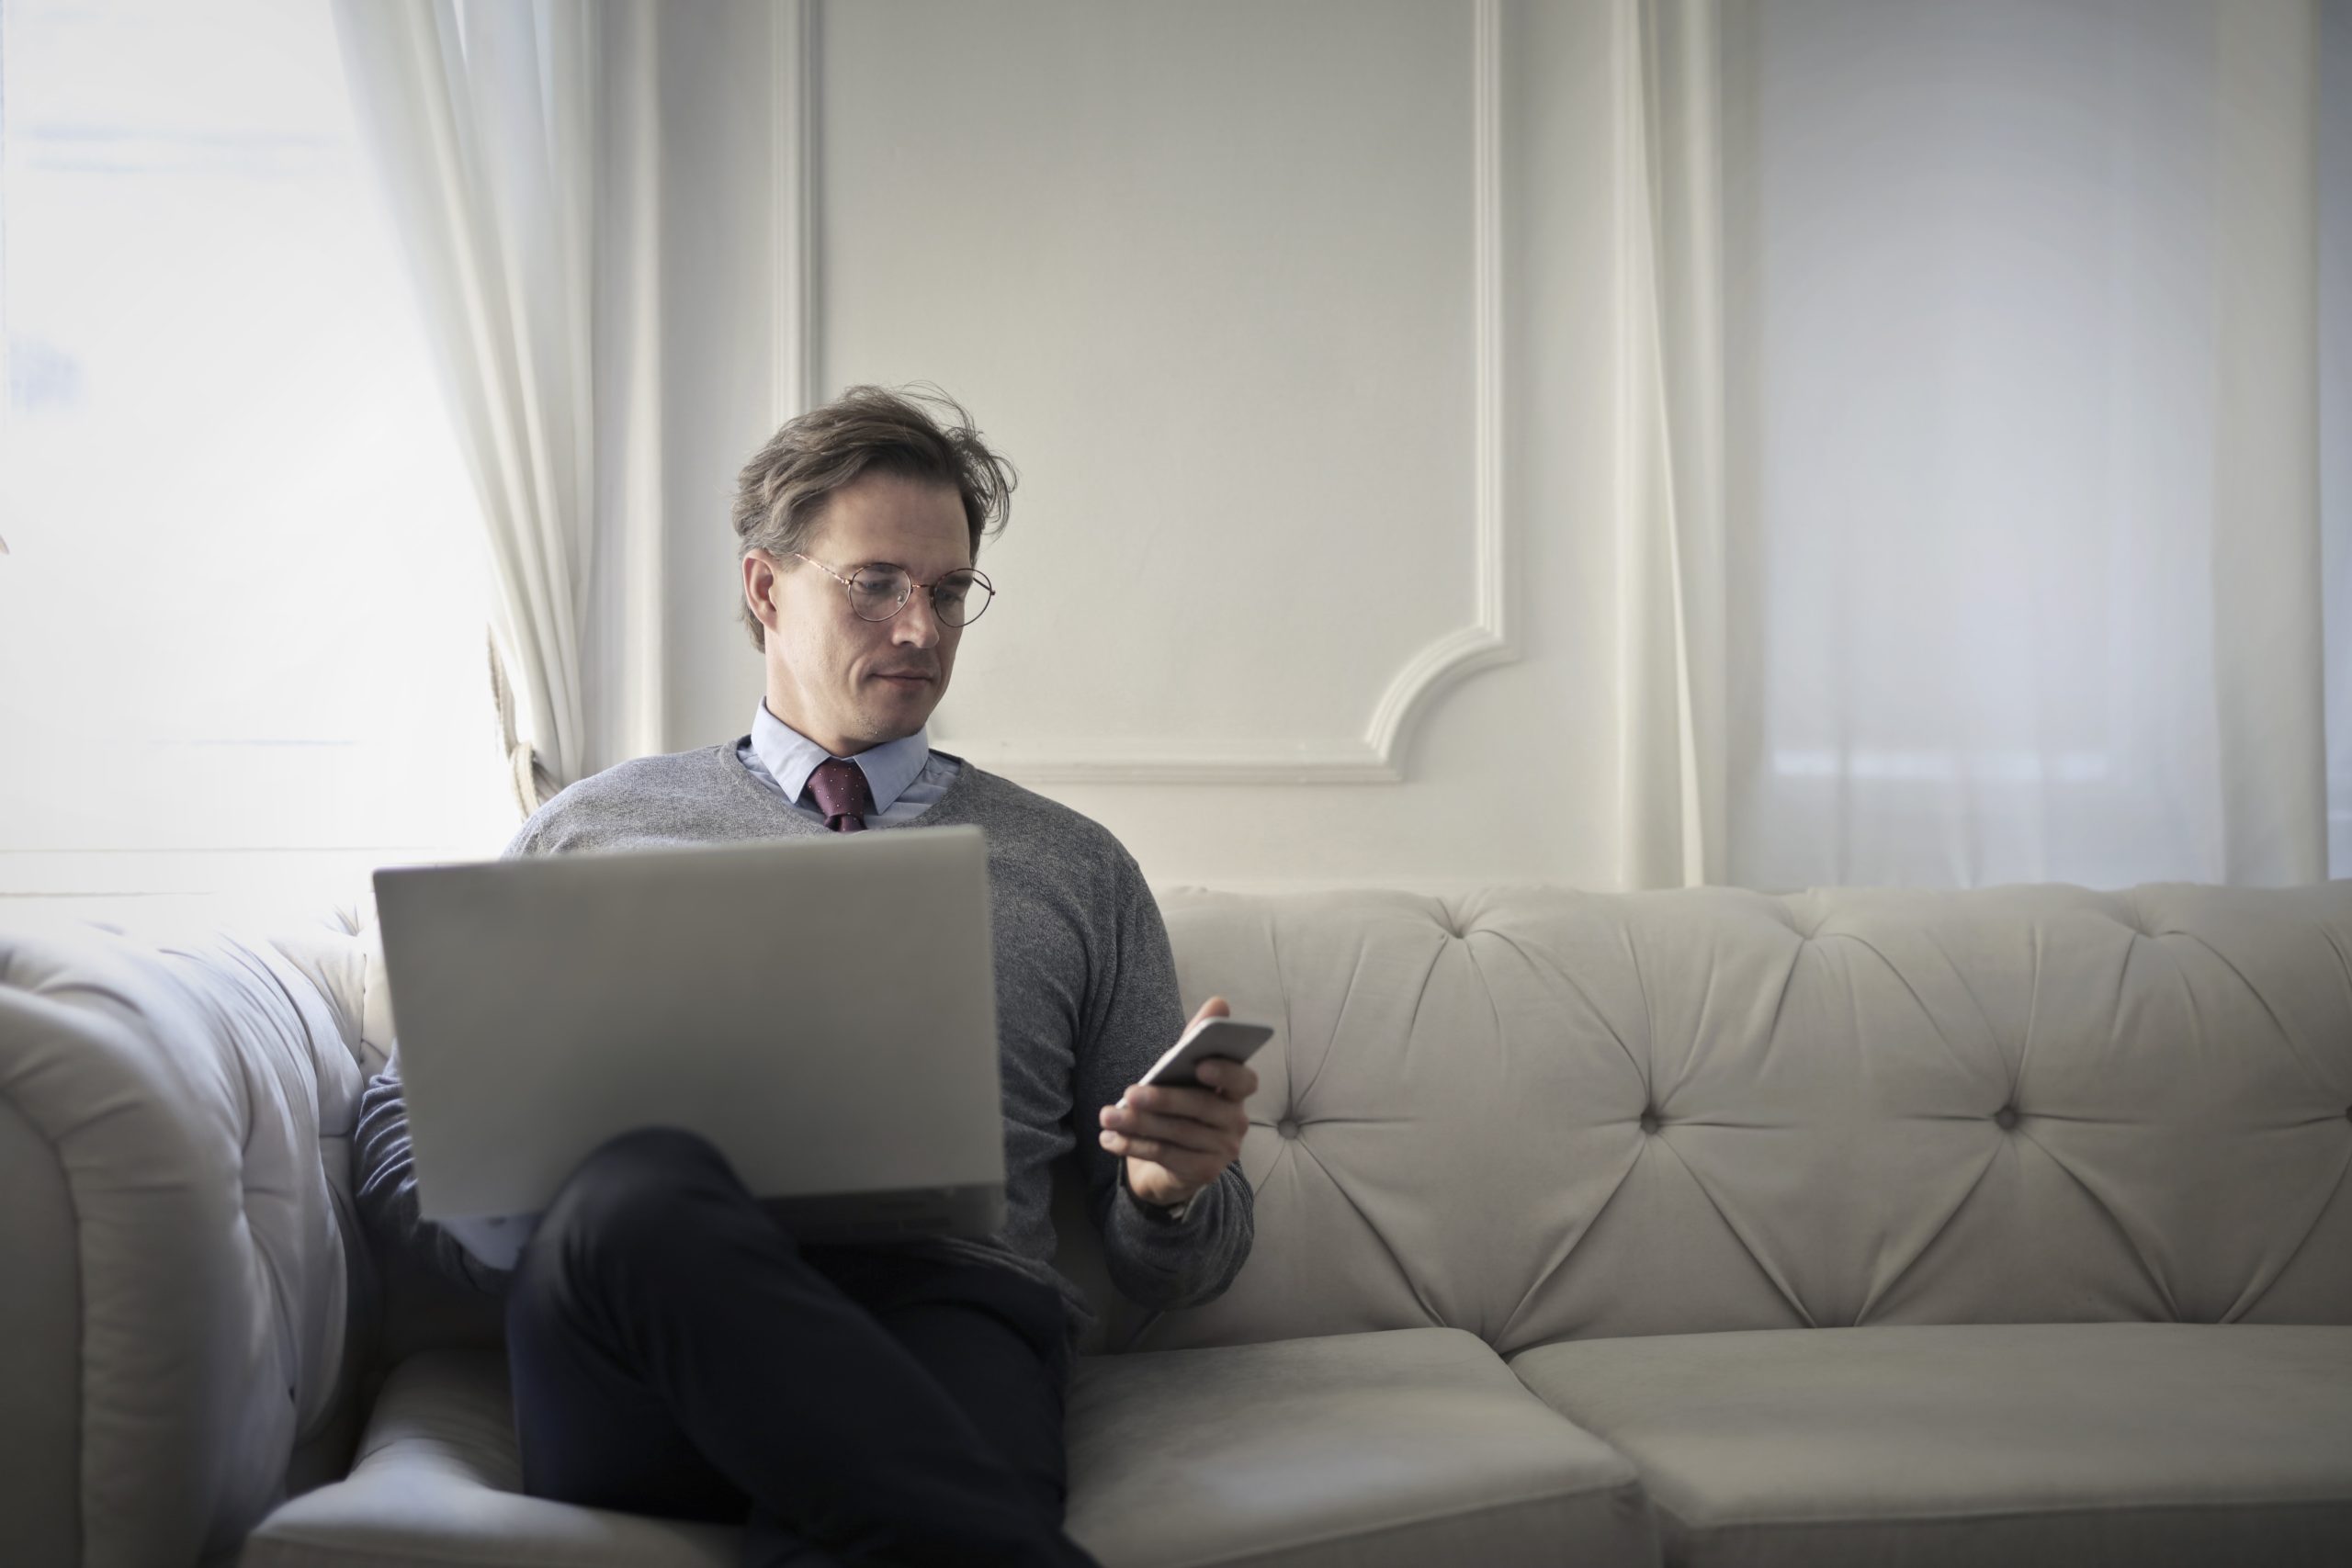 A man in a shirt, tie and jumper sits on a sofa at home with a laptop on his knees, and holding a mobile phone